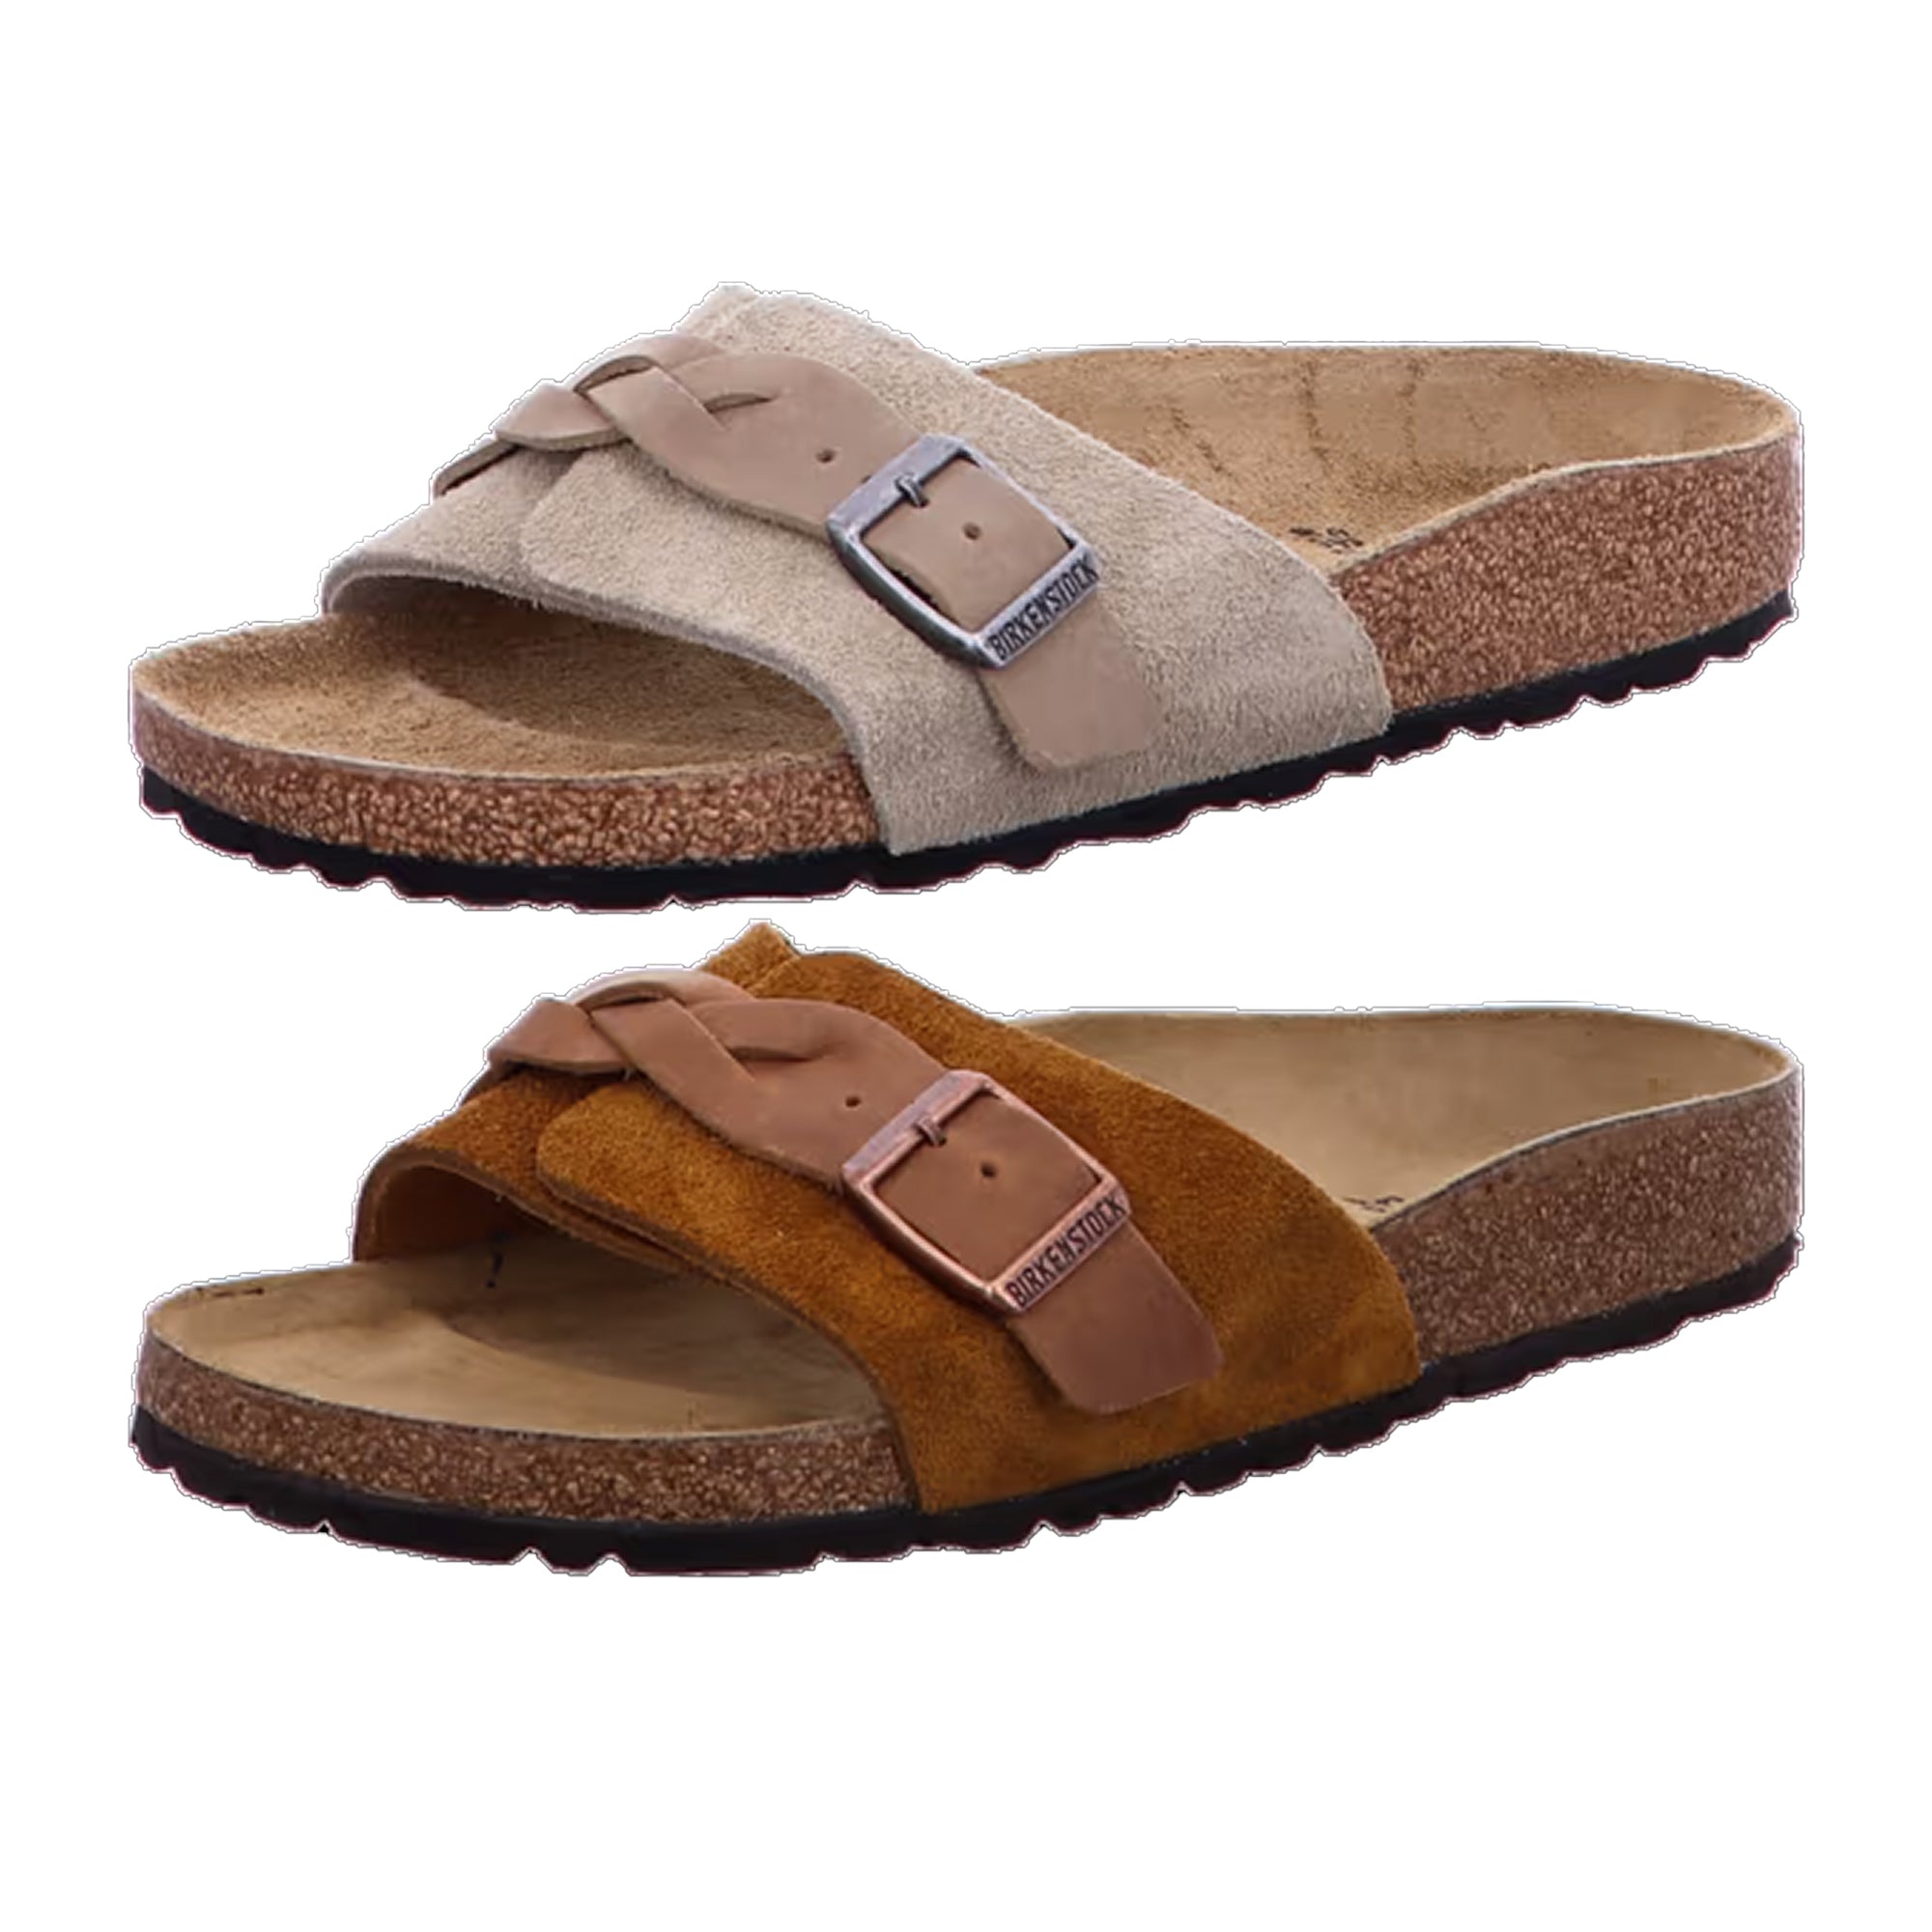 Birkenstock Oita Braided Suede Leather Slides Mules Sandals Mink Taupe New